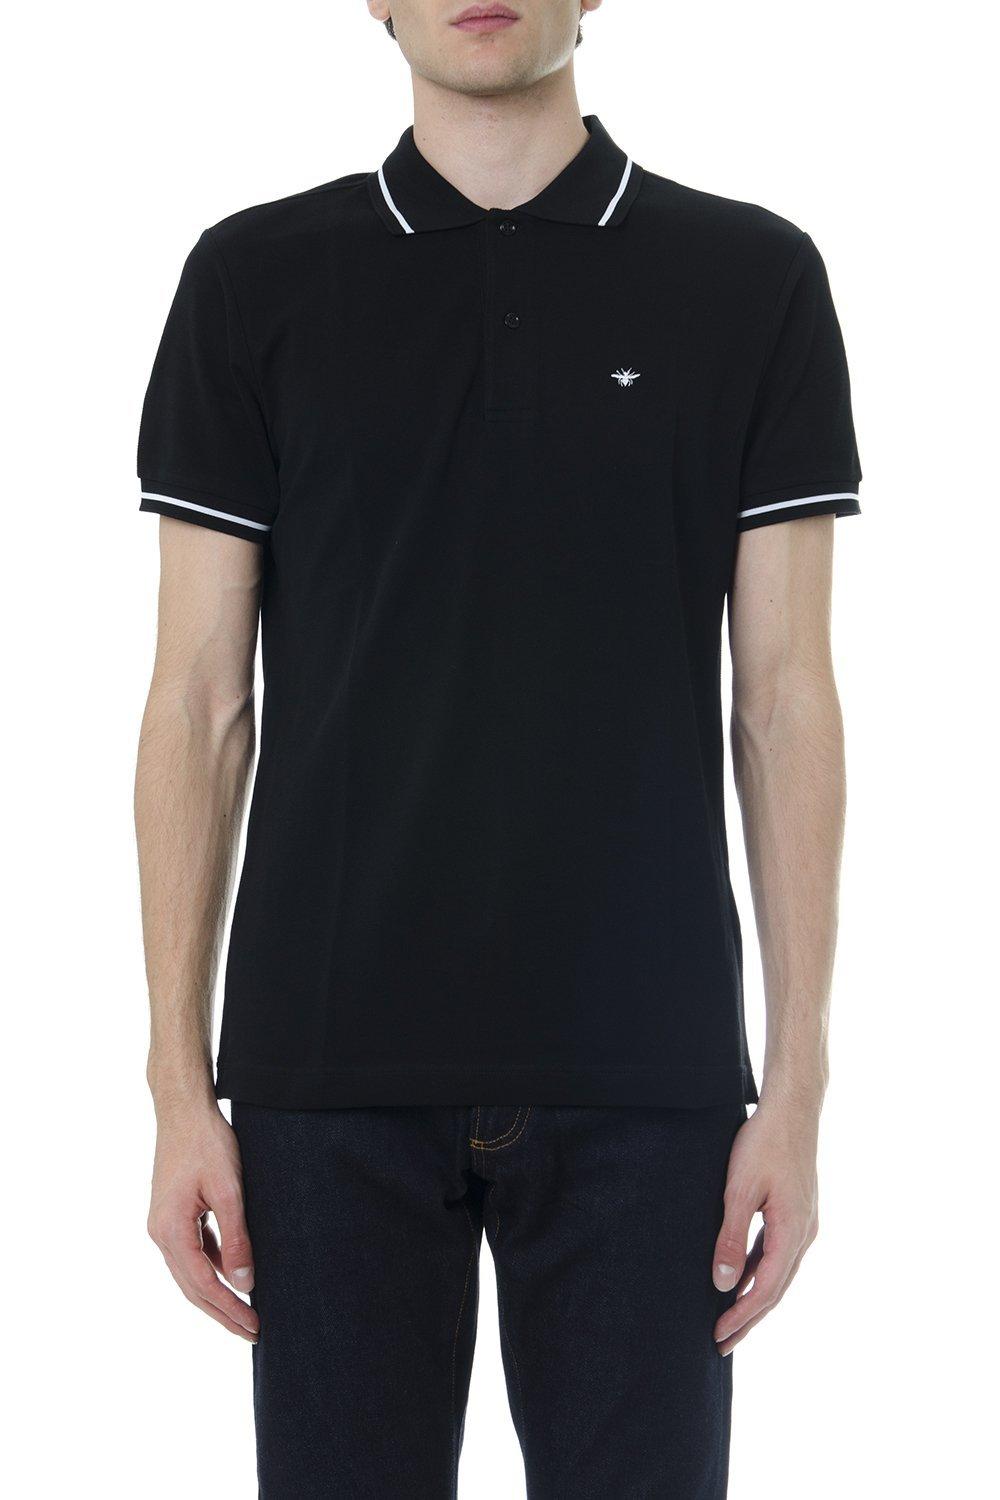 Dior Homme Cotton Bee Embroidered Polo Shirt in Black for Men - Lyst